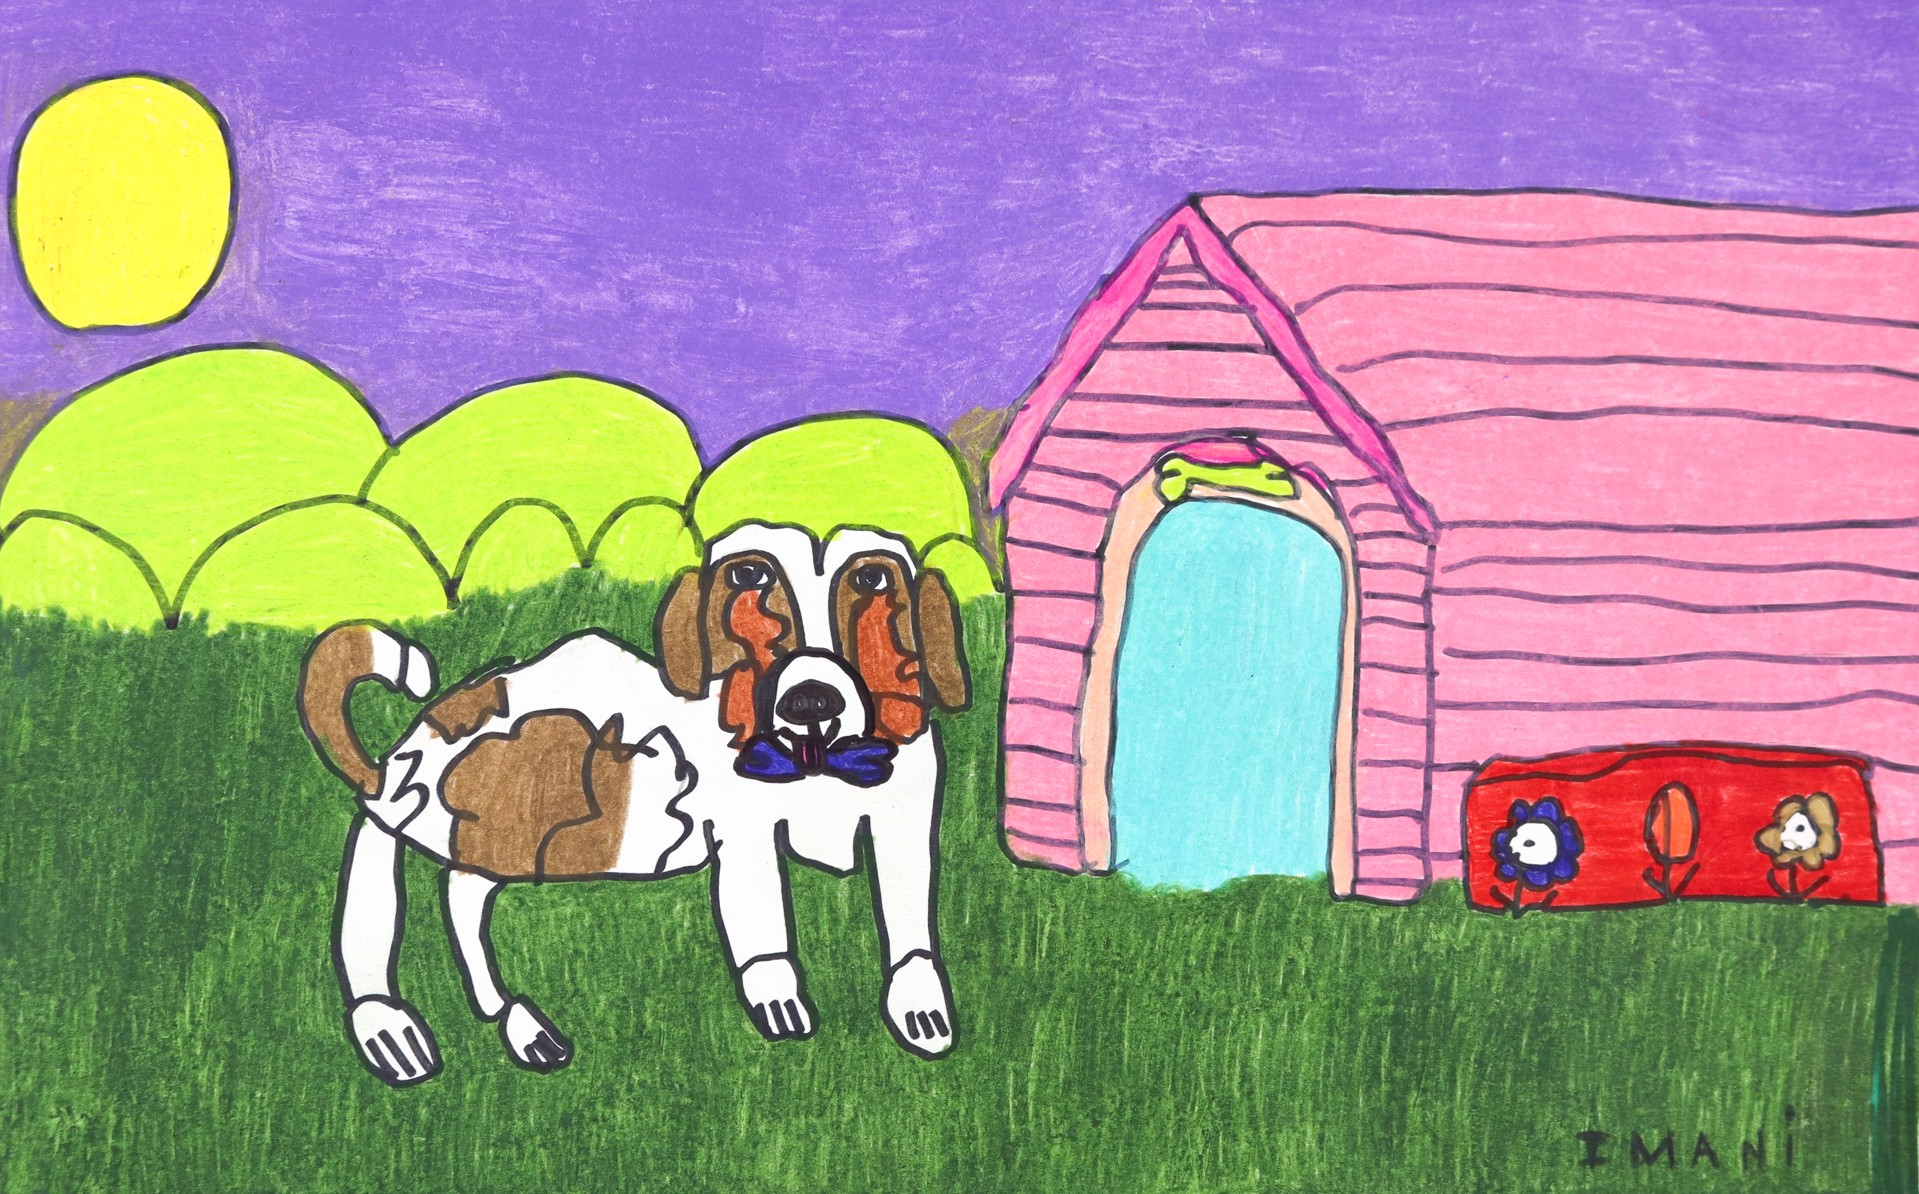 The Dog Outside by Imani Turner